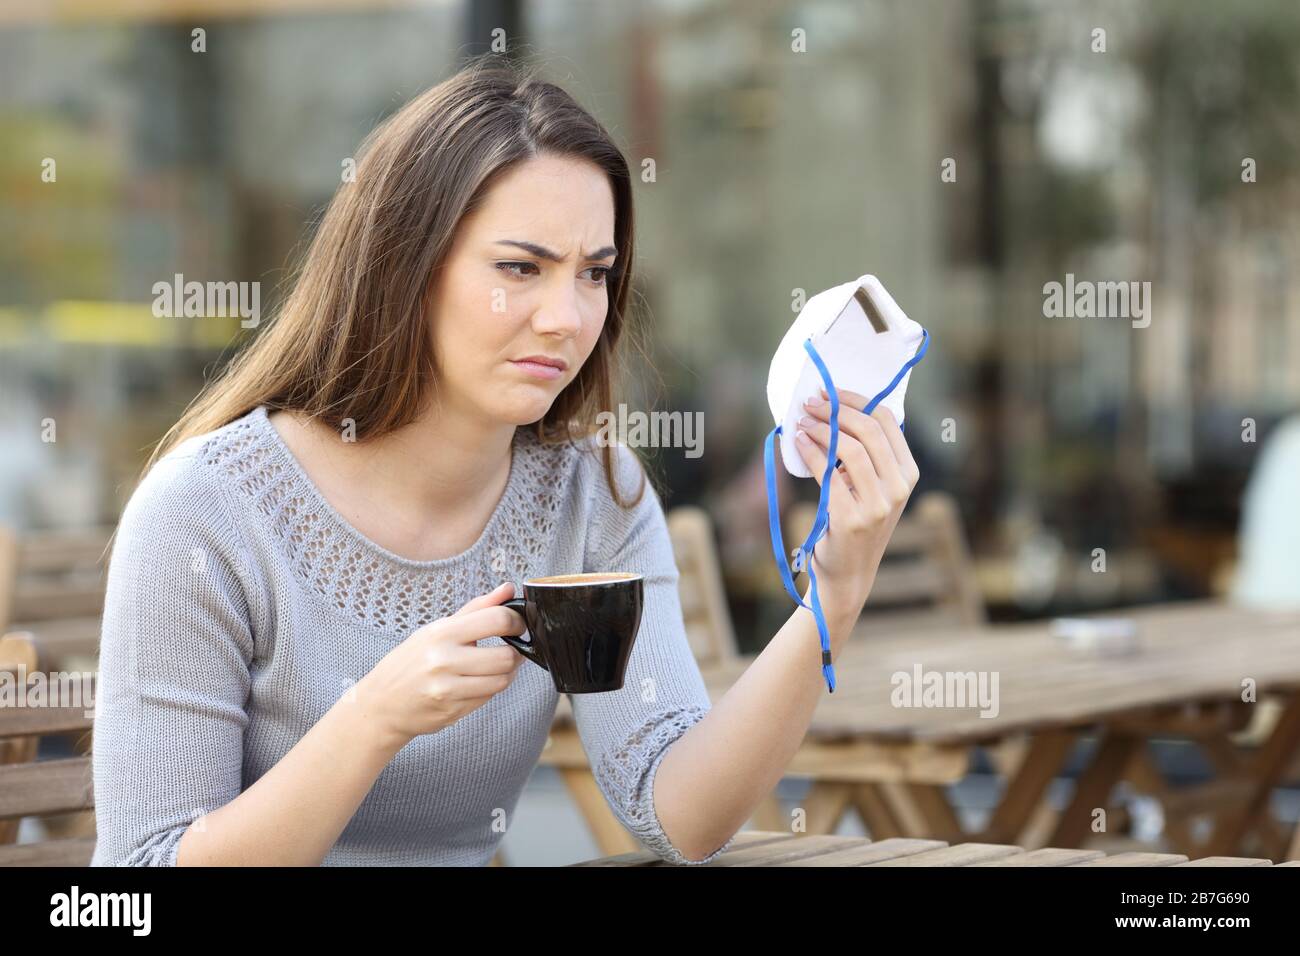 Doubtful young woman looking suspicious at protective face mask on a coffee shop terrace Stock Photo